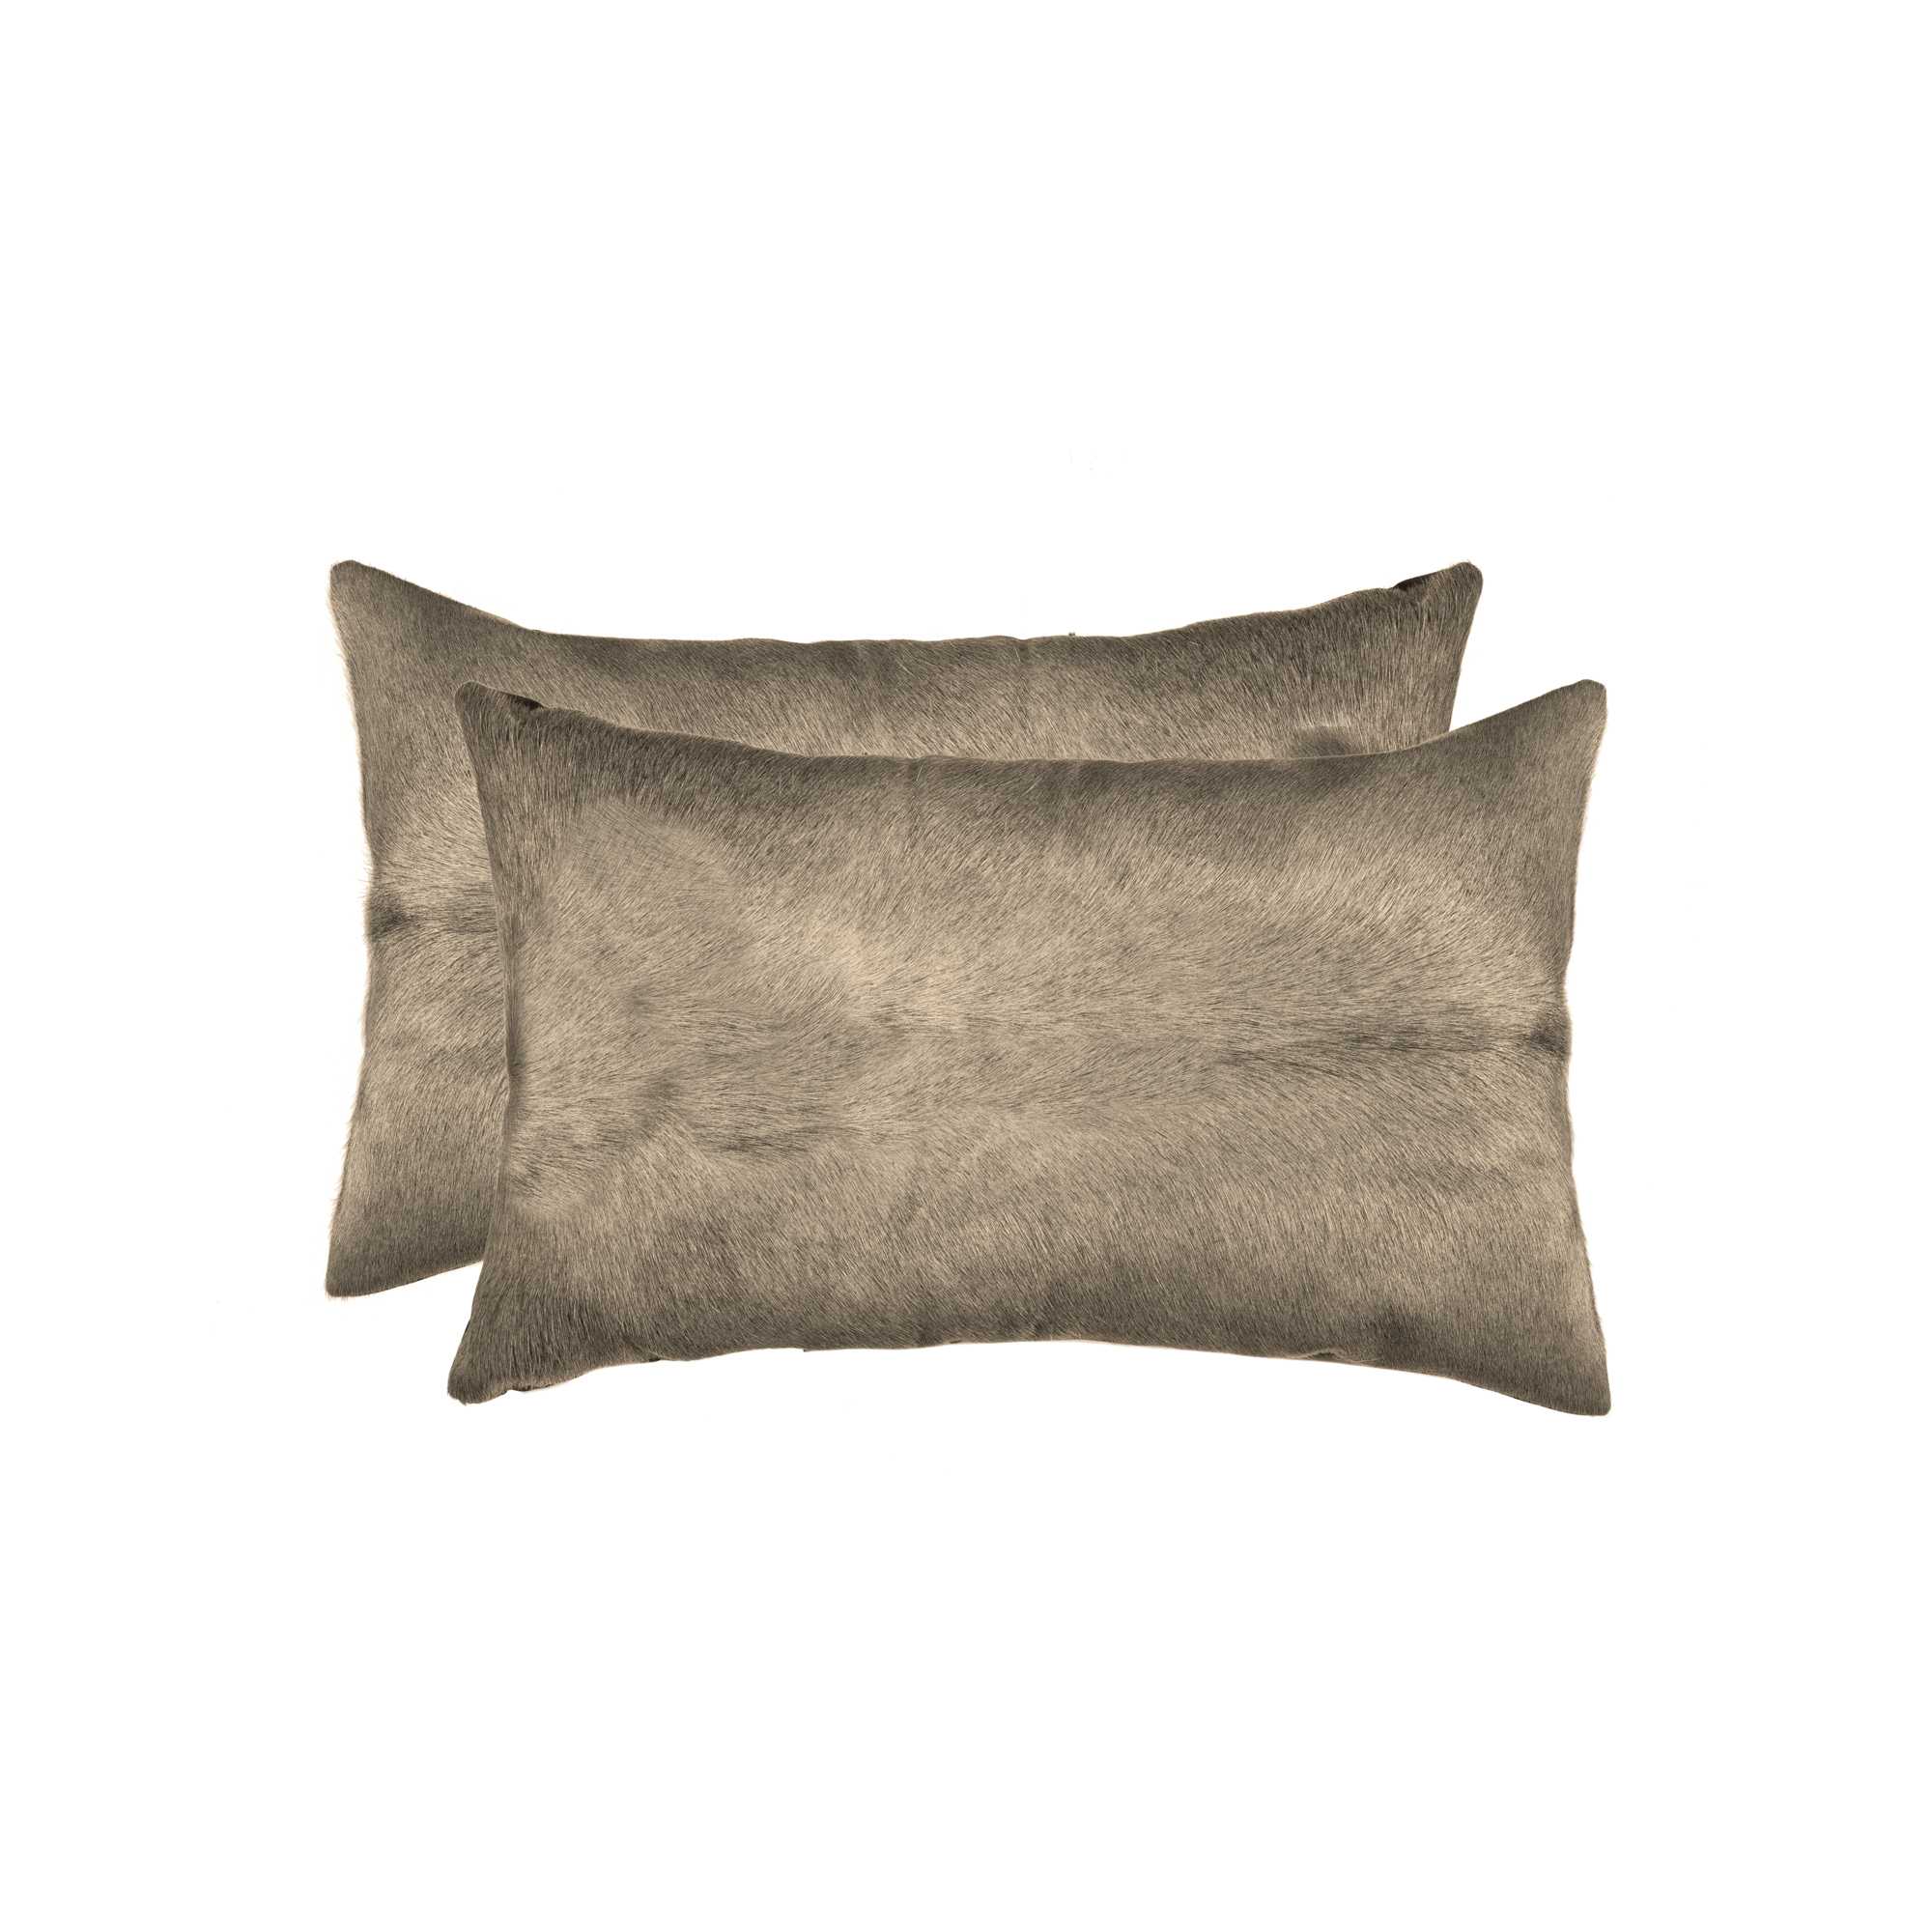 12" x 20" x 5" Taupe, Cowhide - Pillow 2-Pack